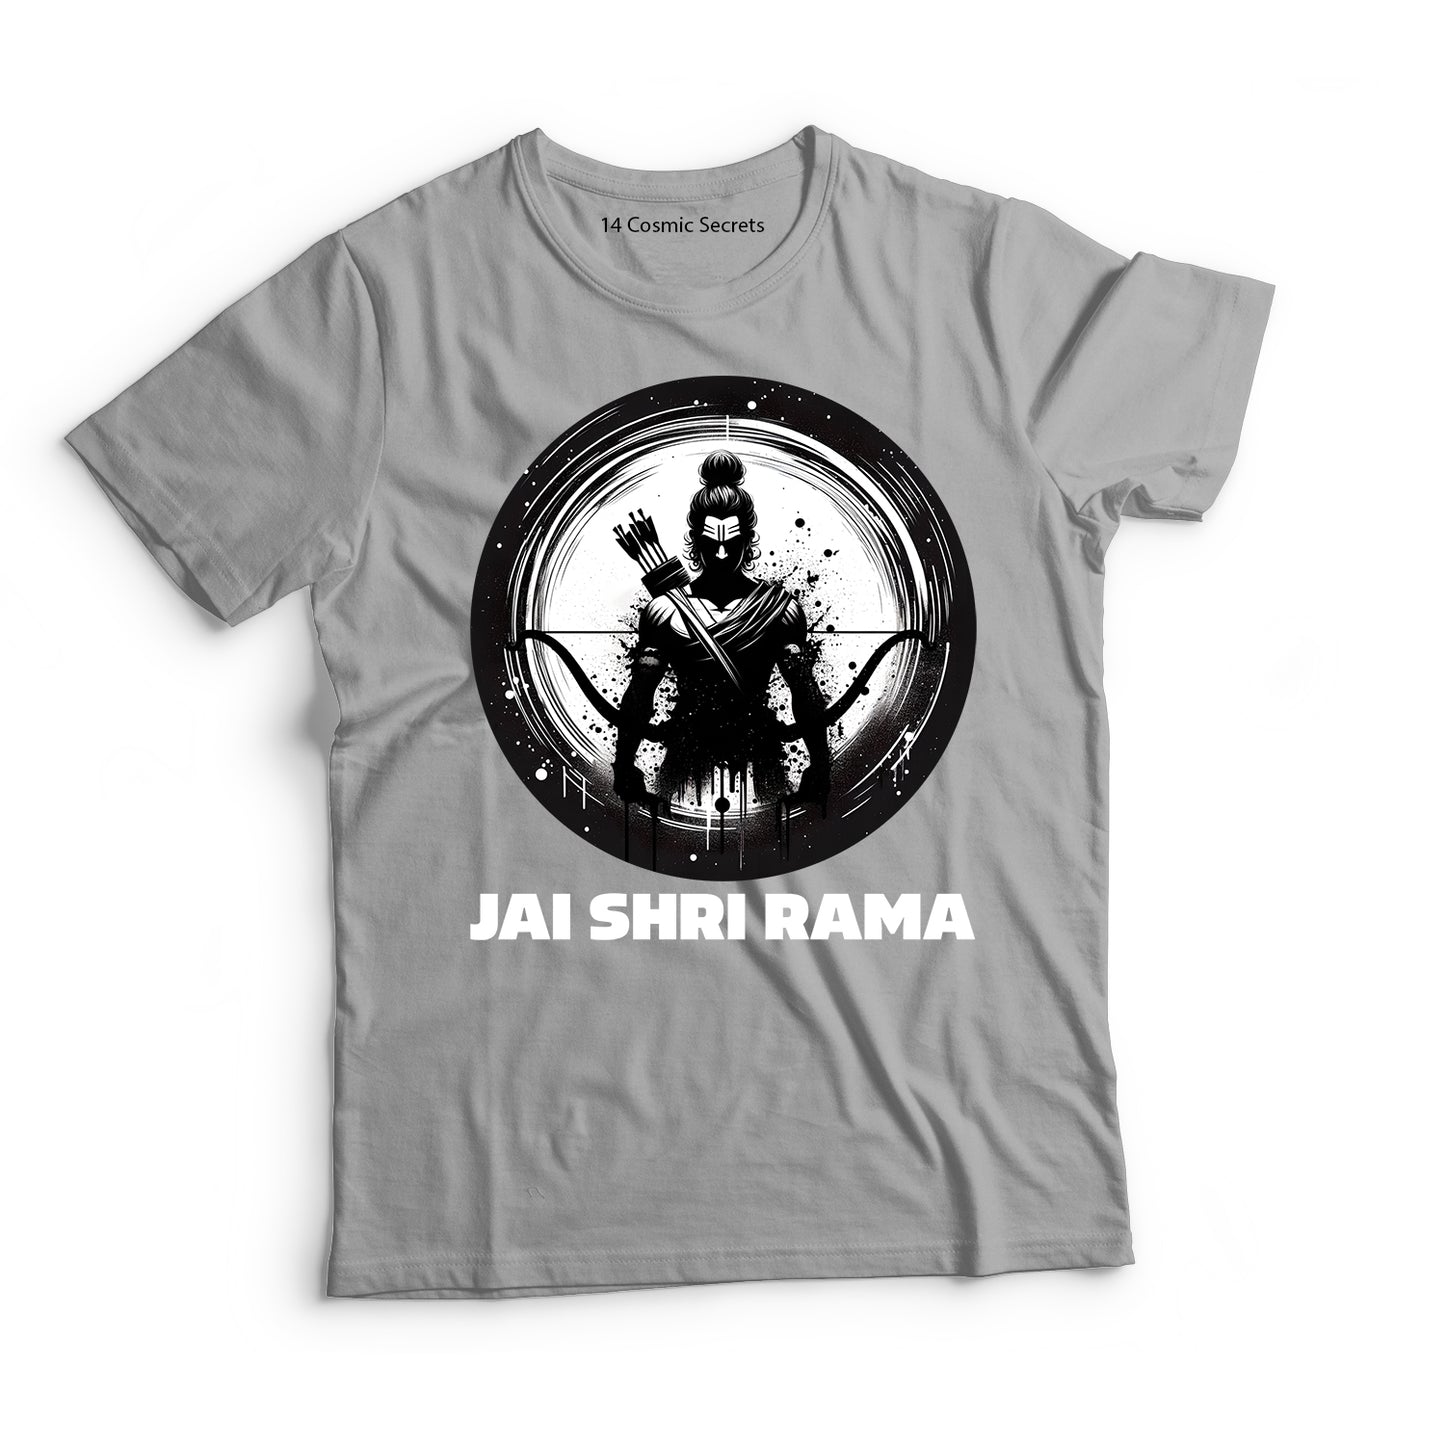 Rama's Might: Unmatched Warrior Graphic Printed T-Shirt for Men Cotton T-Shirt Original Super Heroes of India T-Shirt